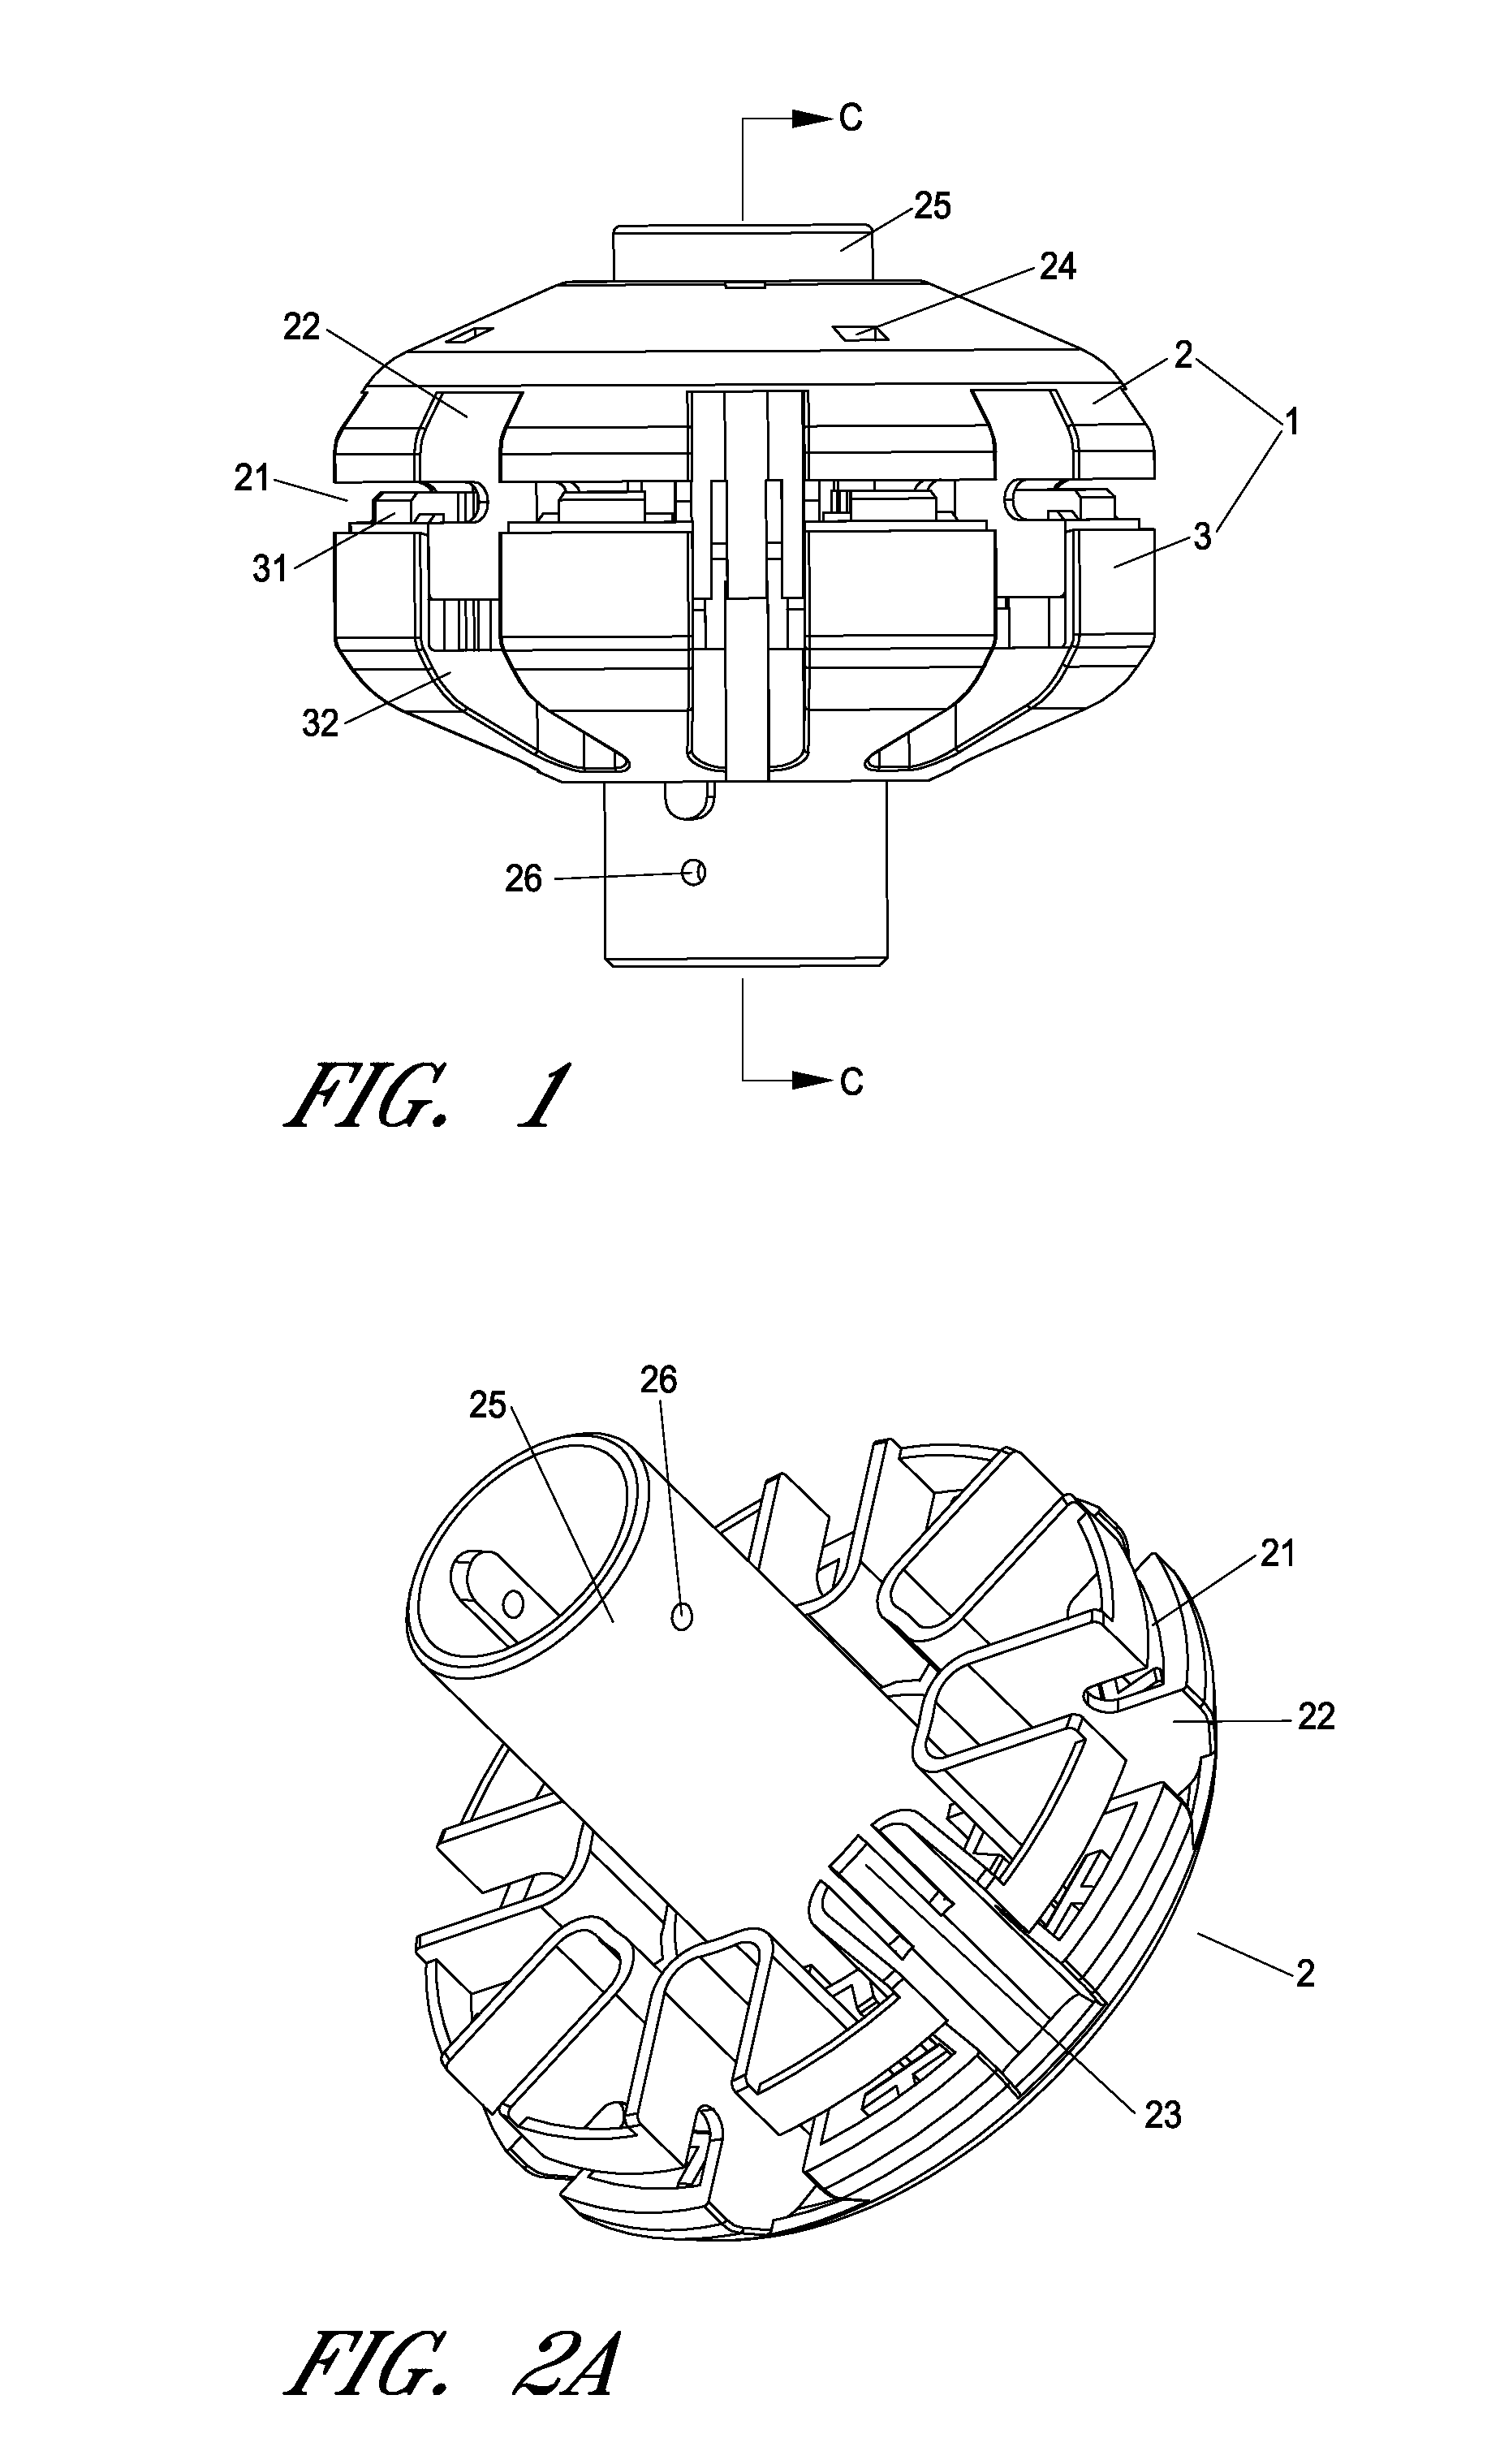 Umbrella quick frame assembly systems and methods